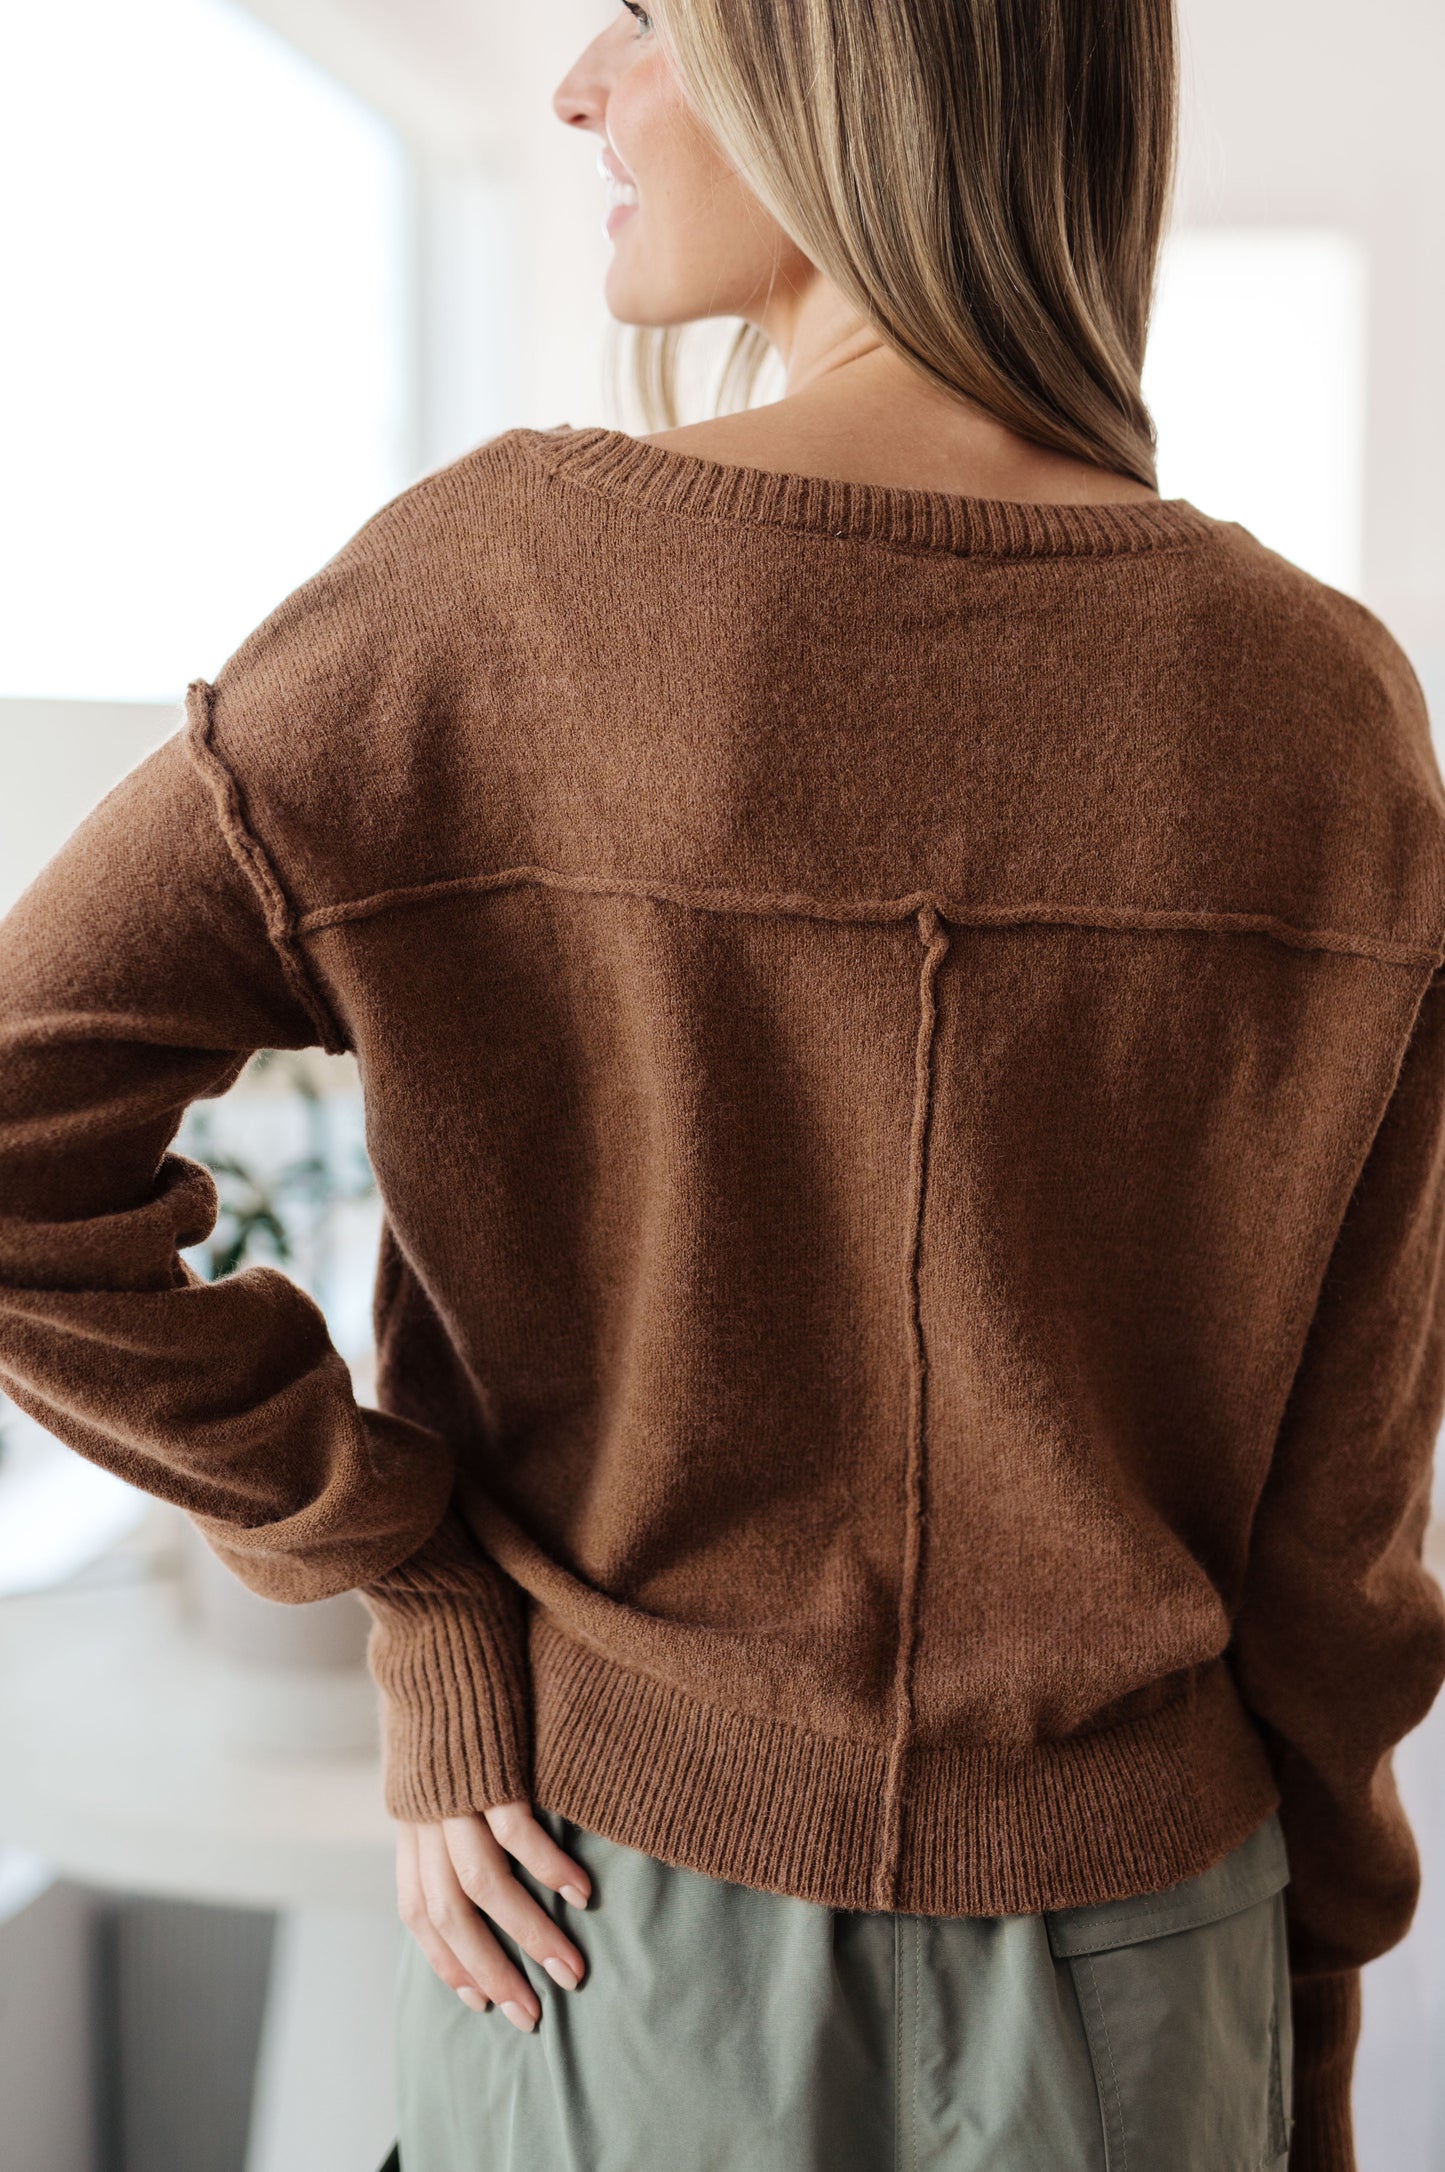 Back to Life V-Neck Sweater in Mocha - Southern Divas Boutique